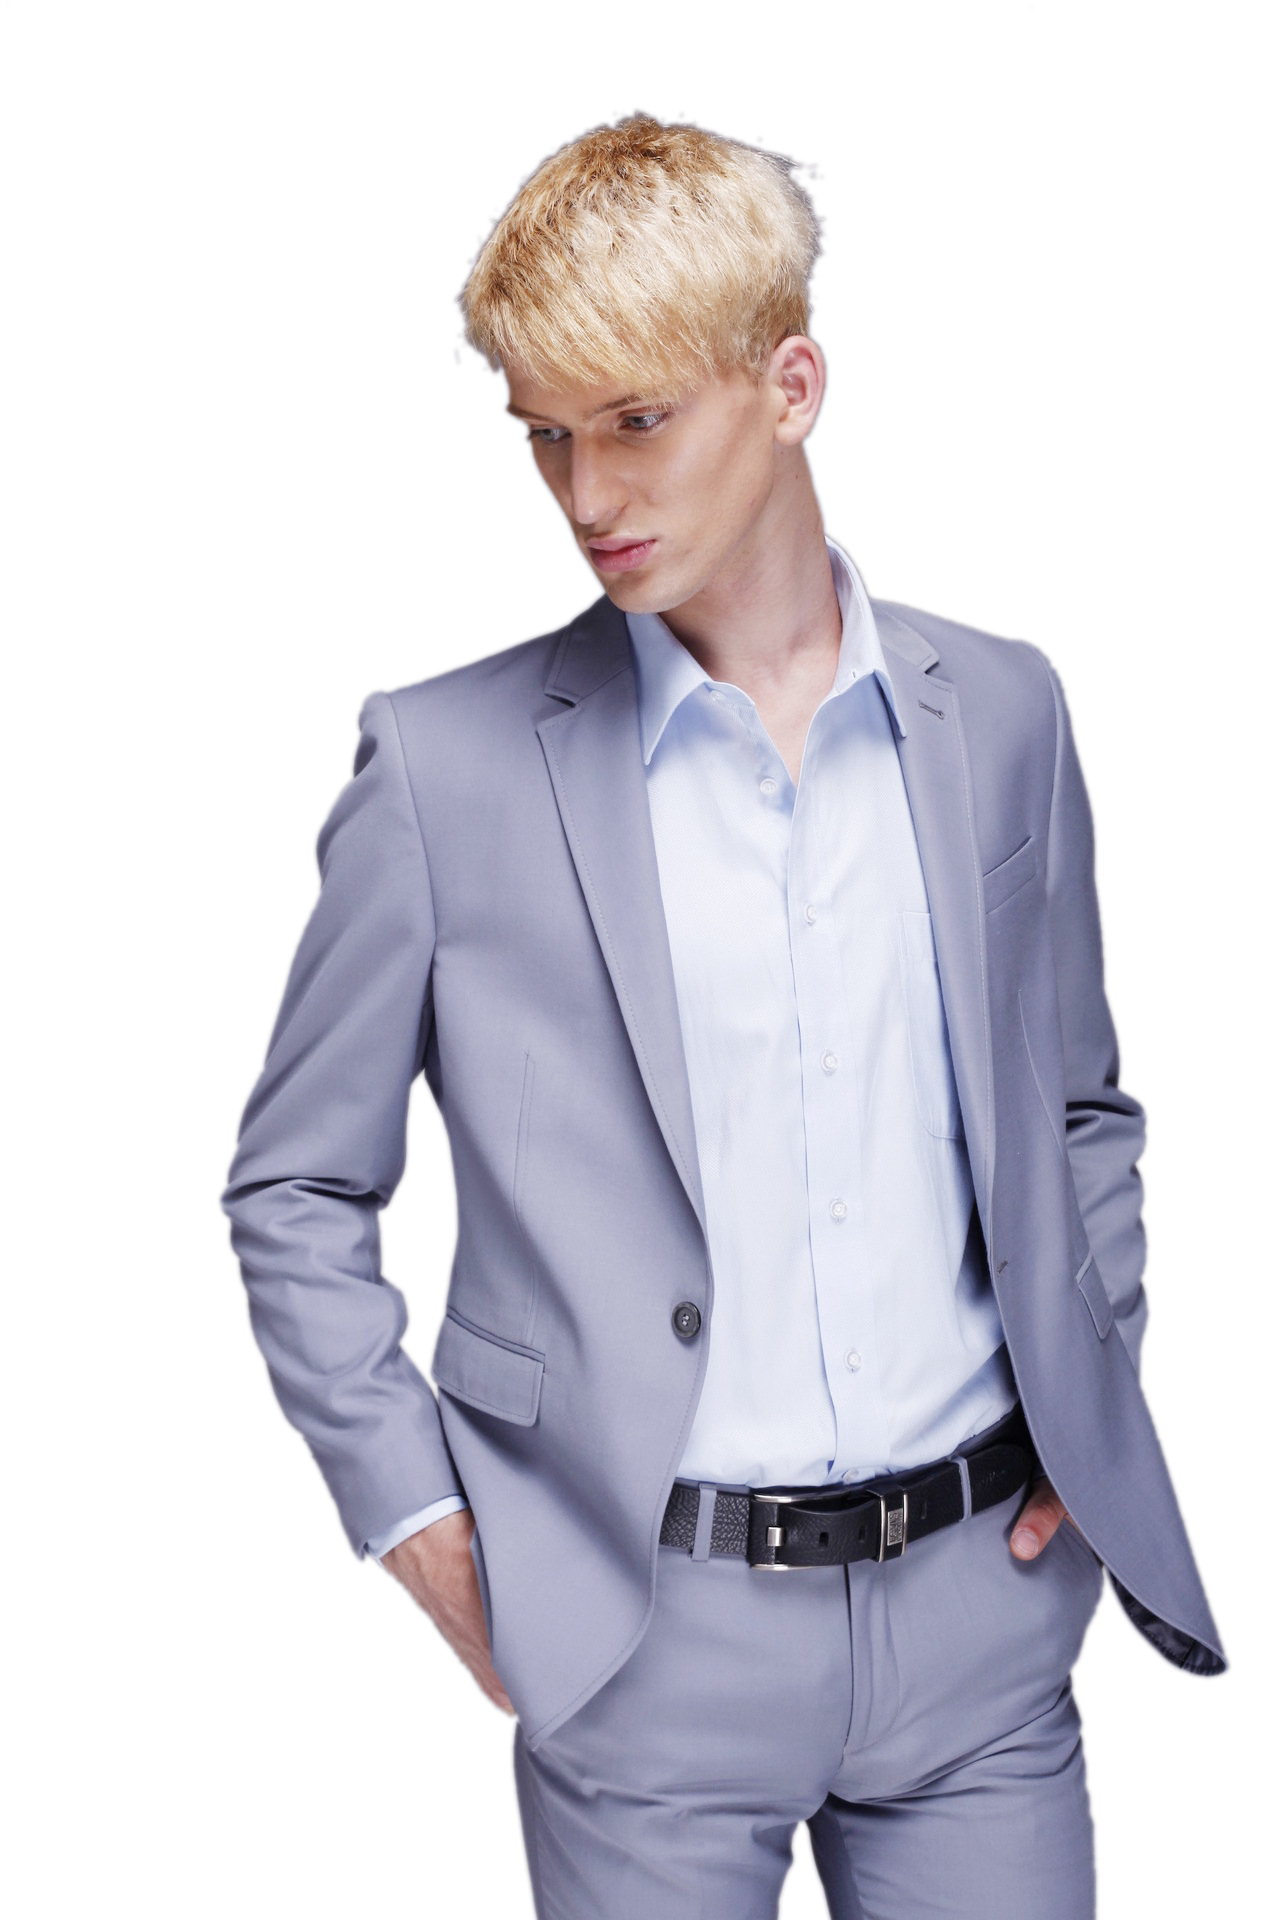 Tailored Light Blue Men Suits Outfits Coat Custom Made Wedding Party Wear Clothes Notch Lapel Blazer Trousers Jacket Pants